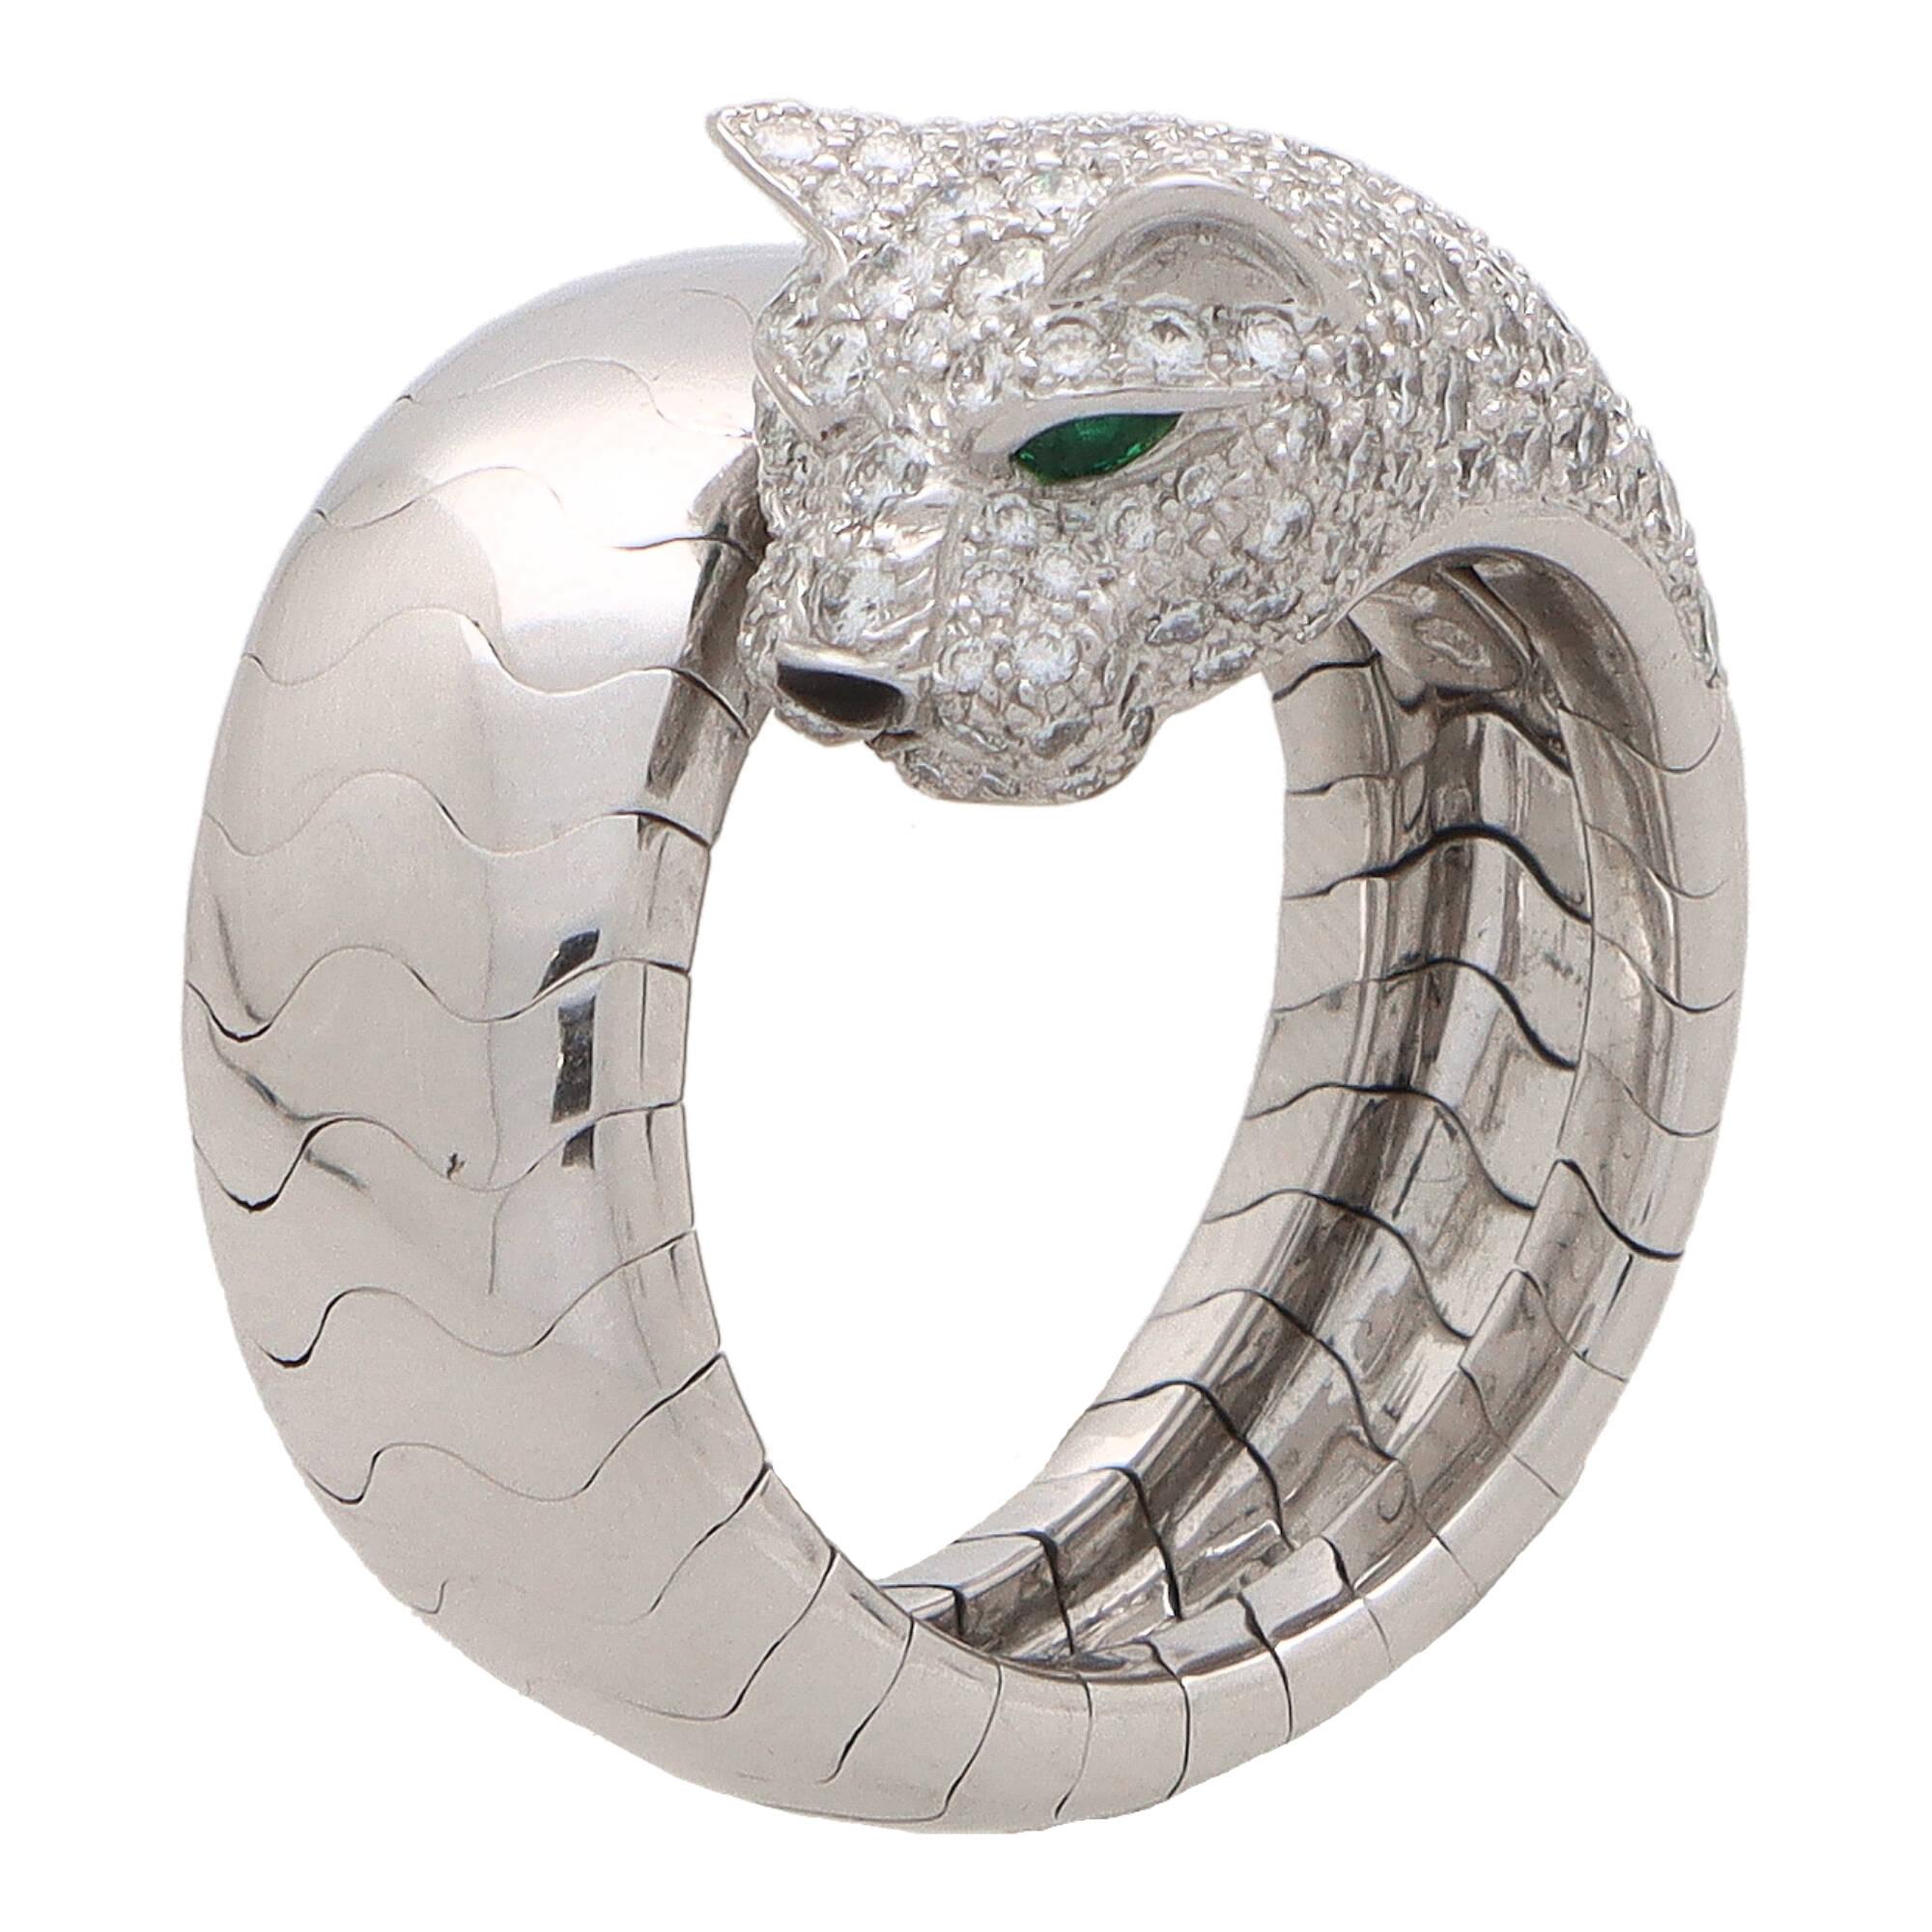 Vintage Cartier Panthere Lakarda Diamond and Emerald Panther Ring in White Gold In Excellent Condition For Sale In London, GB